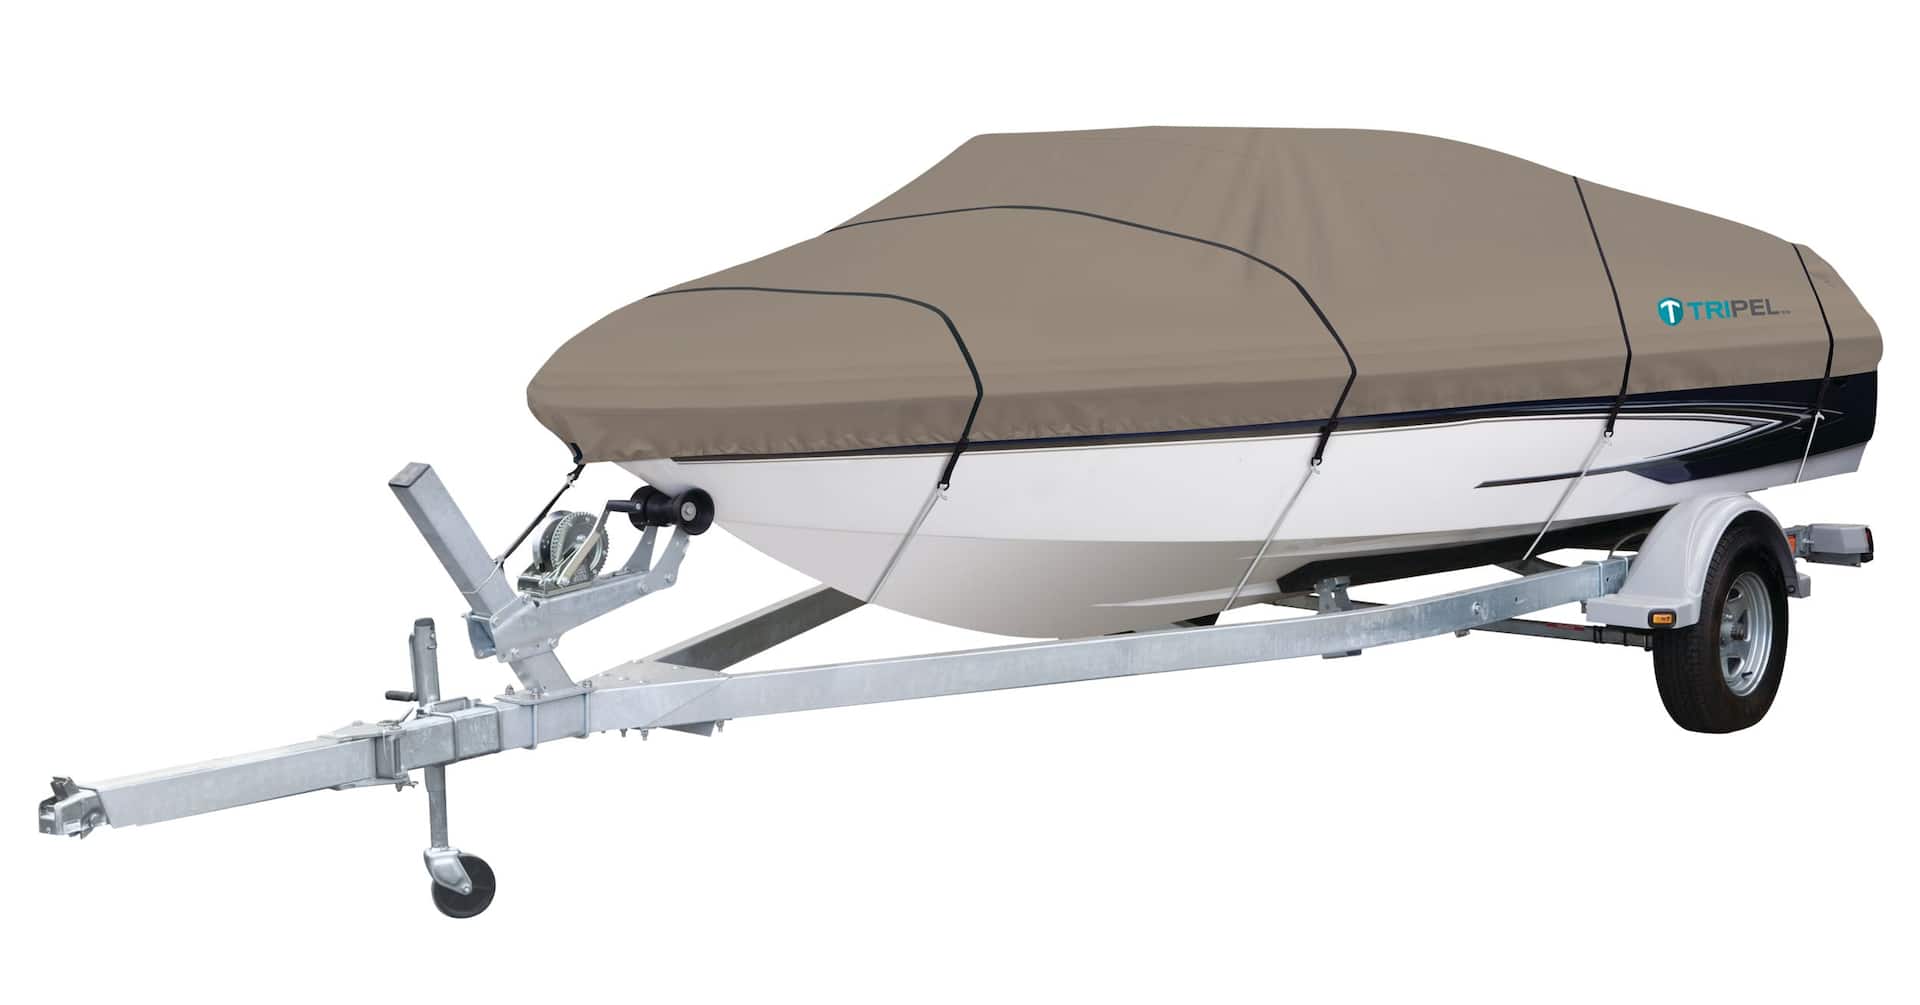 Factory Fit Crestliner Boat Covers - National Boat Covers